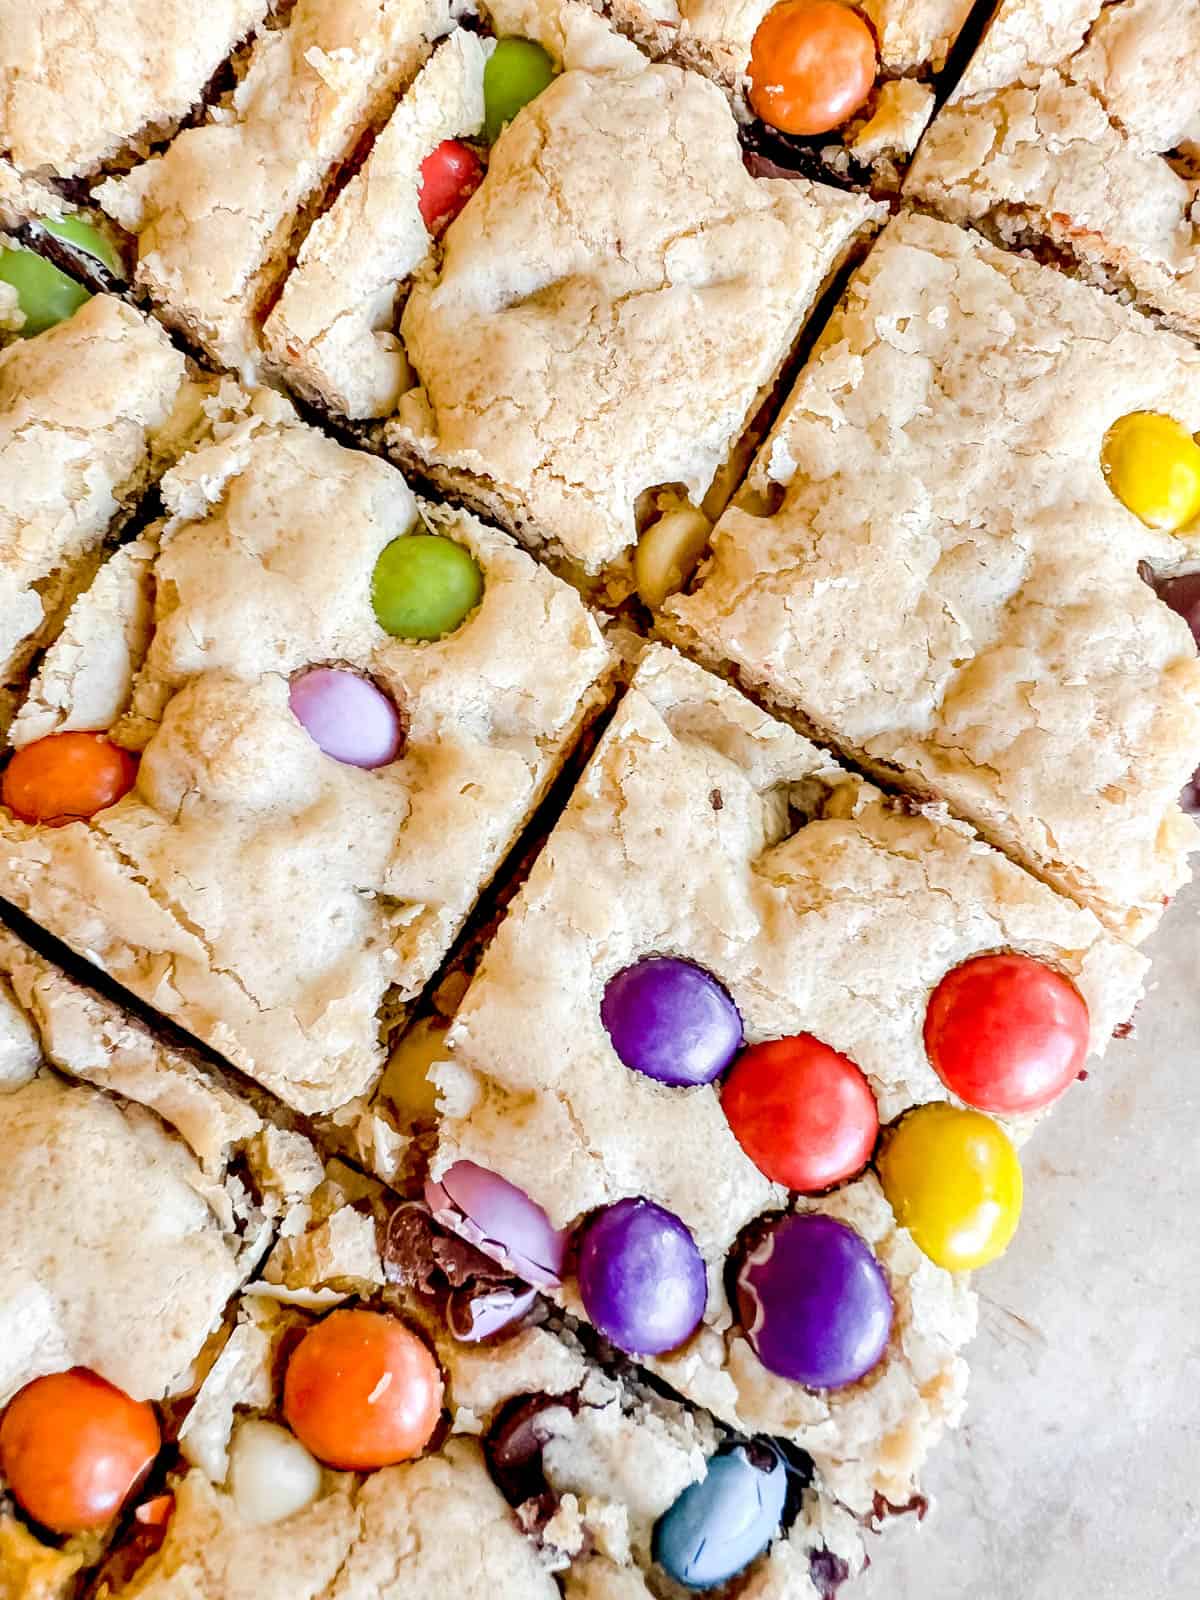 Gooey chocolate chip cookie bars with chocolate candies inside.